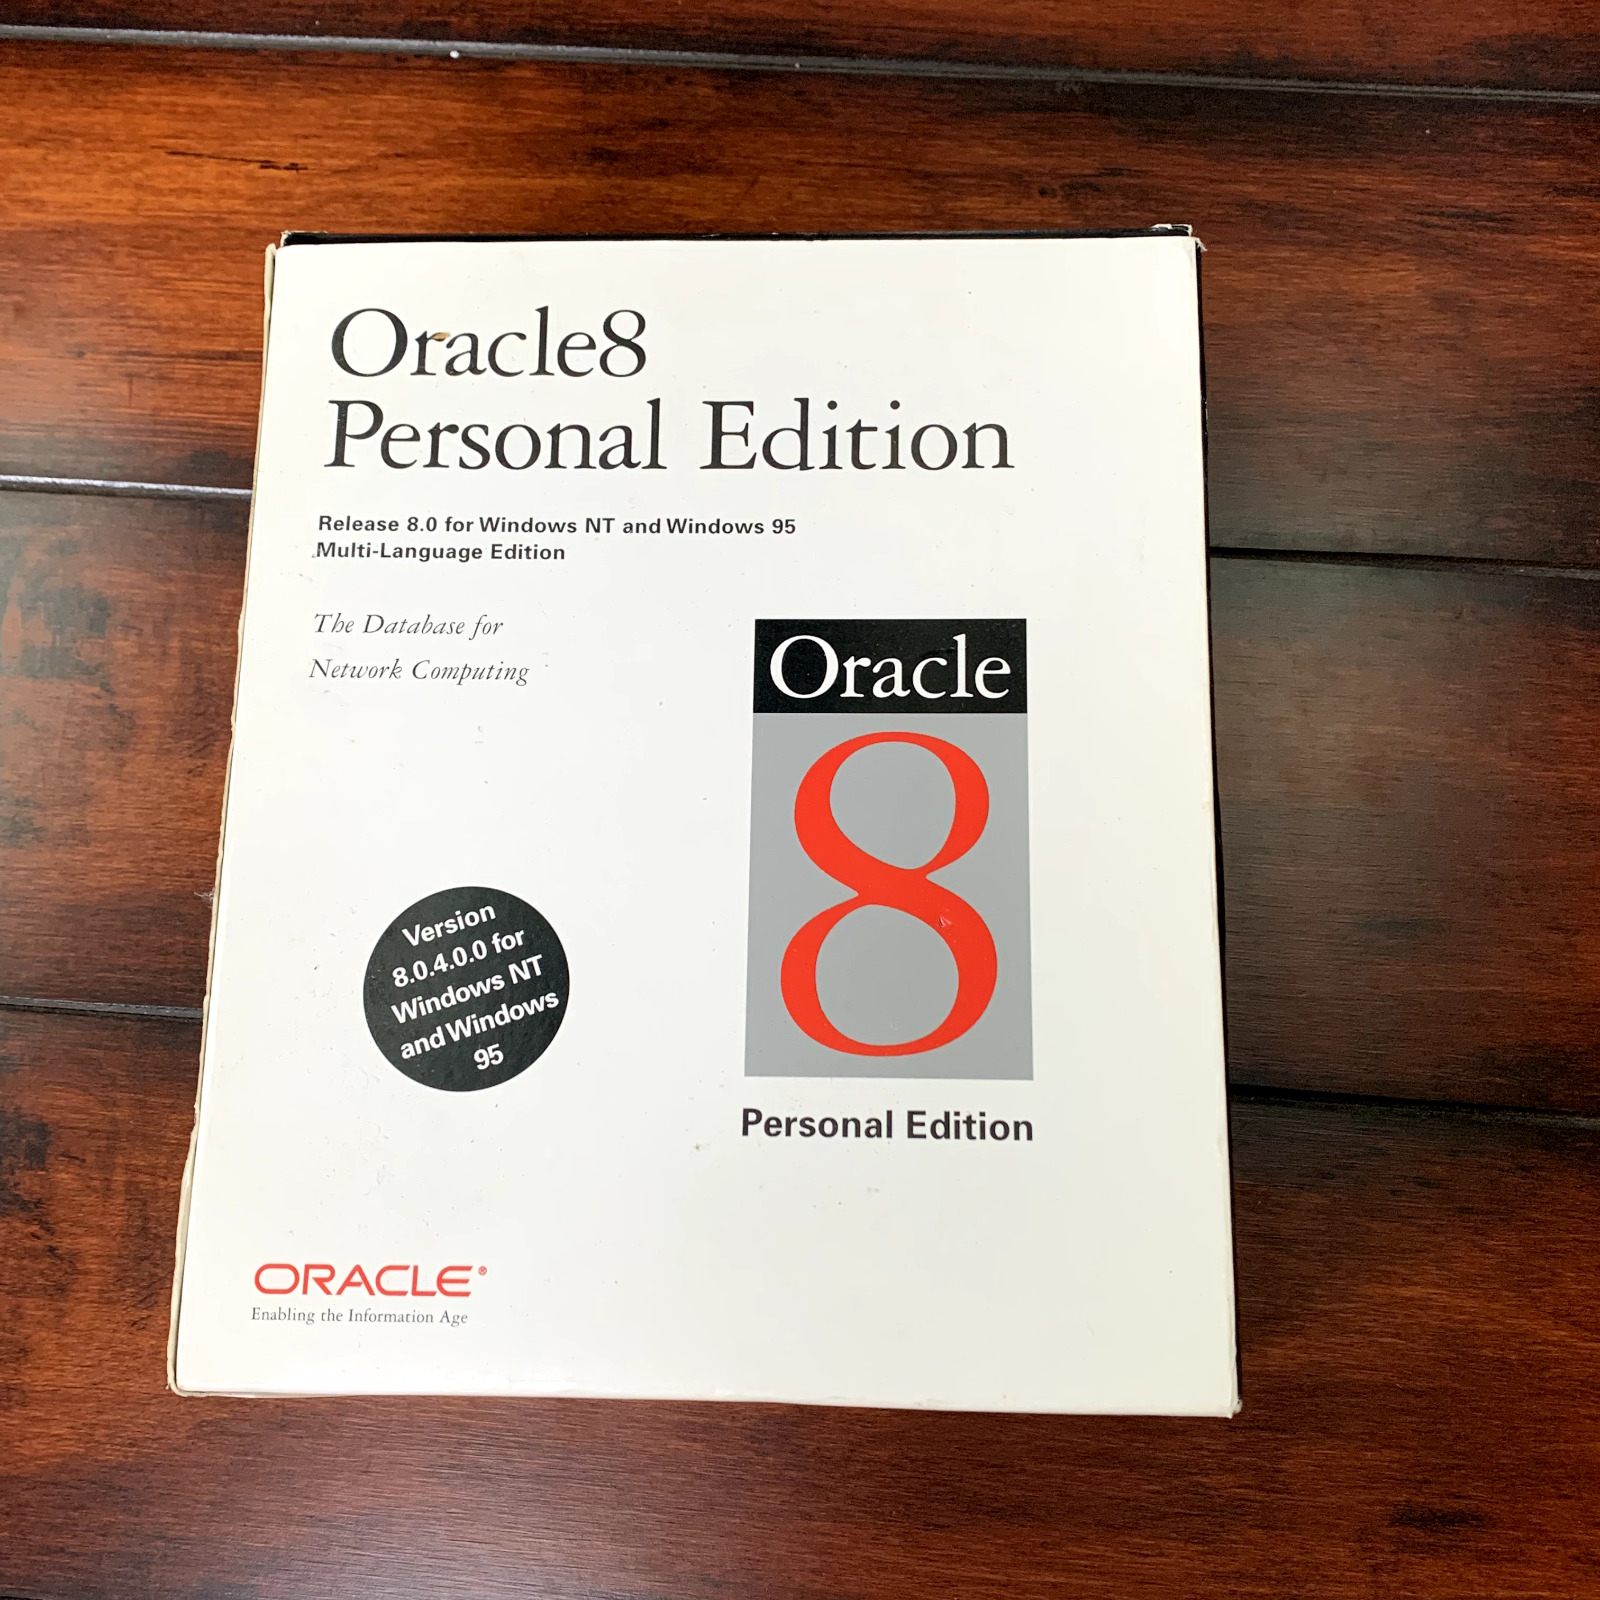 Oracle8 Oracle 8 Personal Edition Windows NT 95 Software VTG Big Box